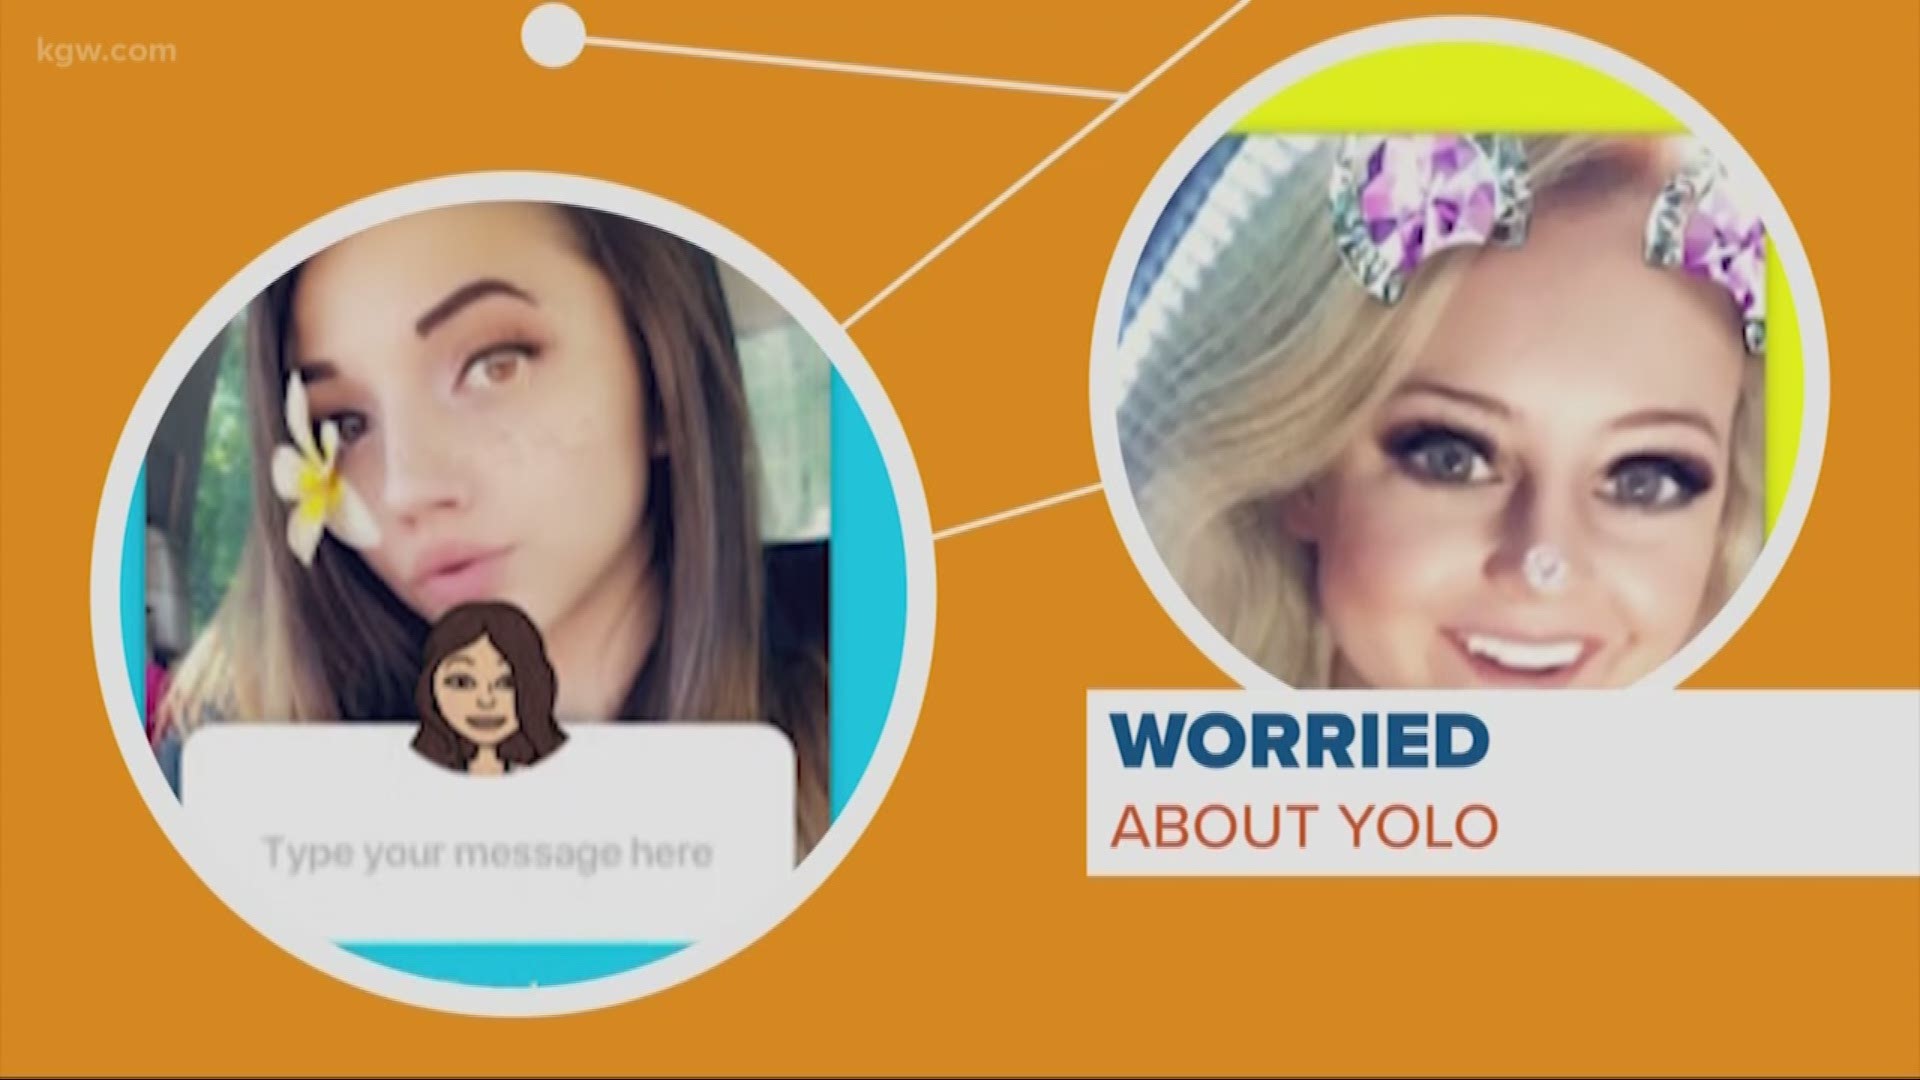 "Yolo" app raising red flags for parents